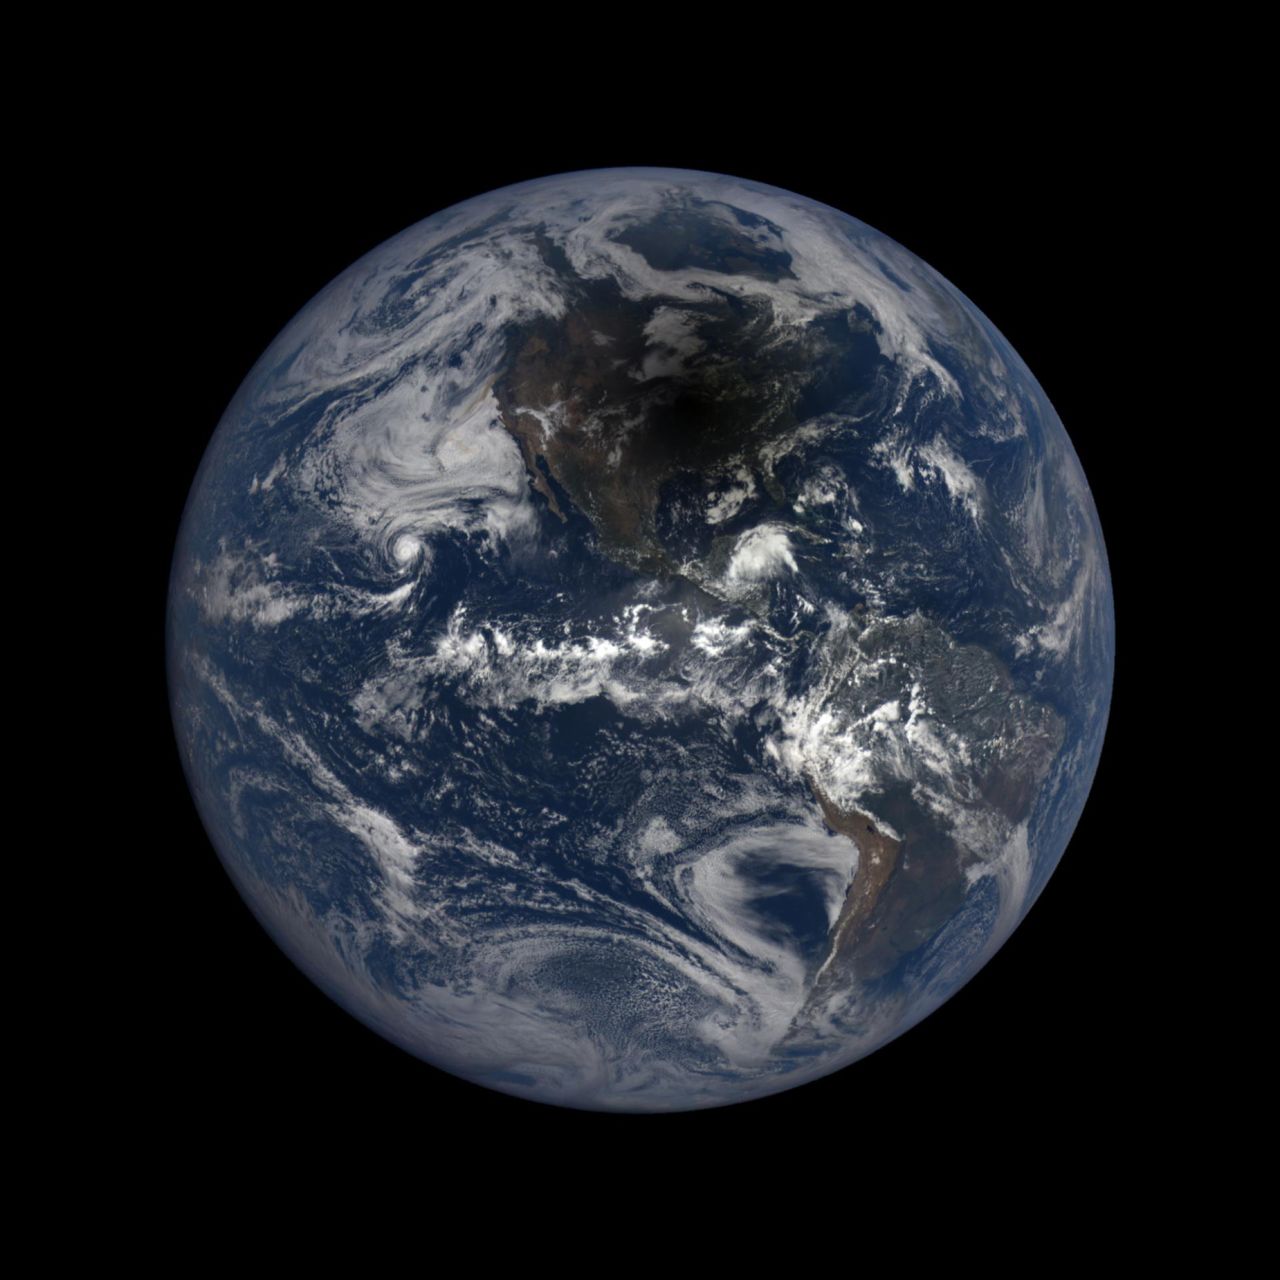 NASA’s Earth Polychromatic Imaging Camera captured the moon casting a shadow during a solar eclipse on August 21, 2017.